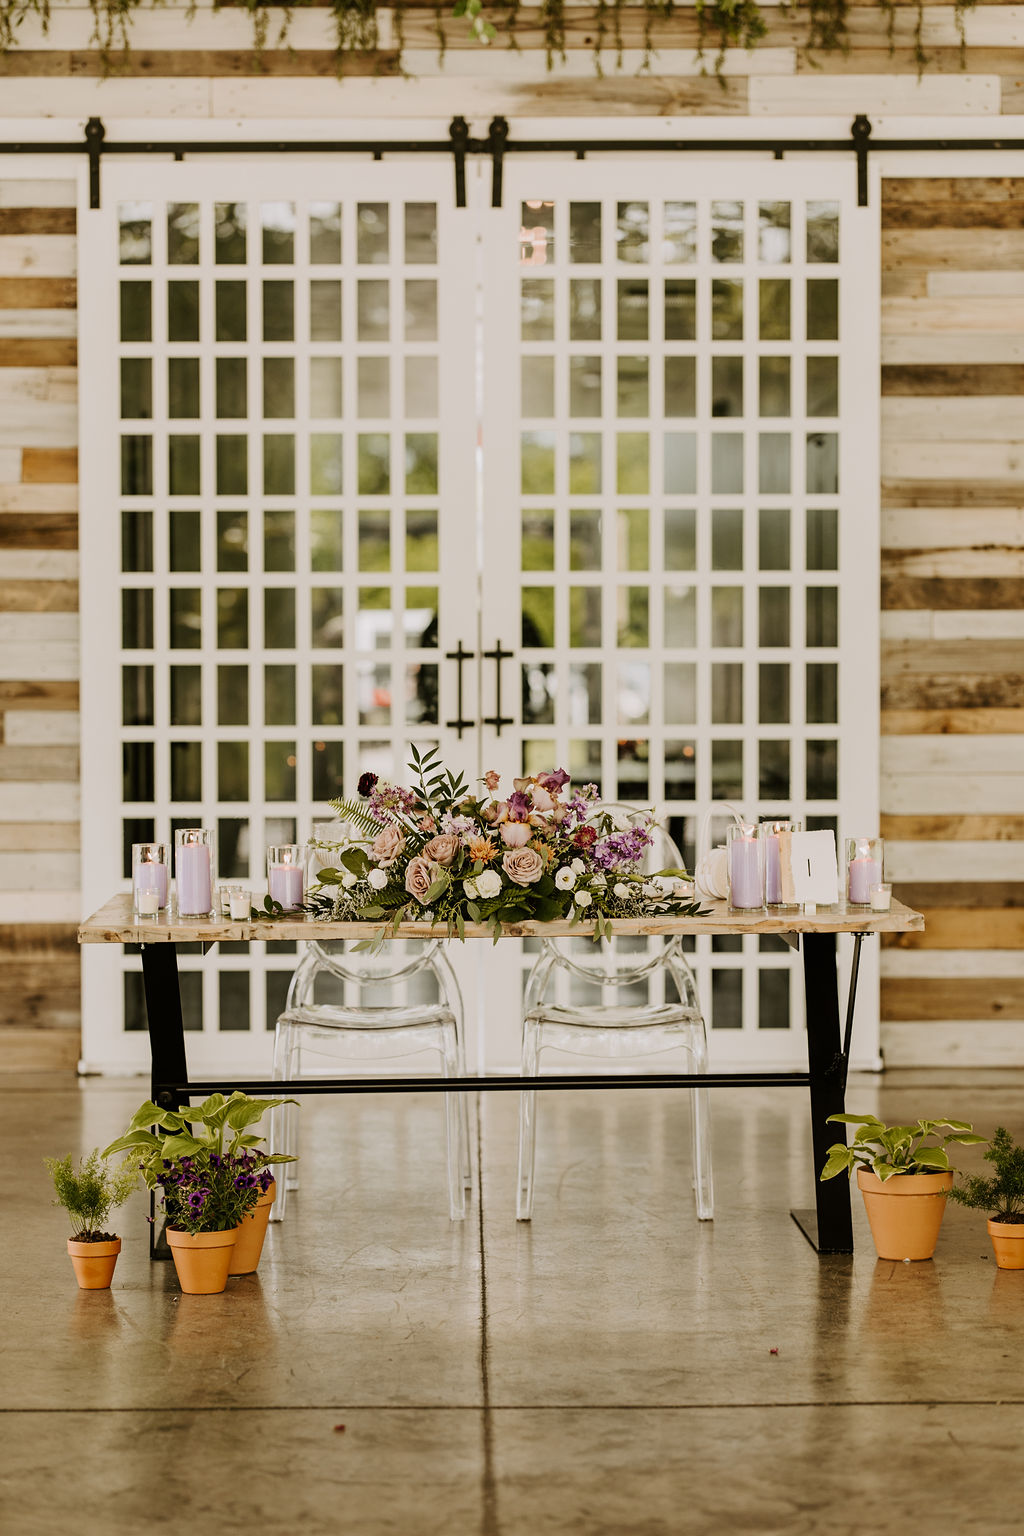 Sweetheart table with purple arrangement and potted plants resting on the floor